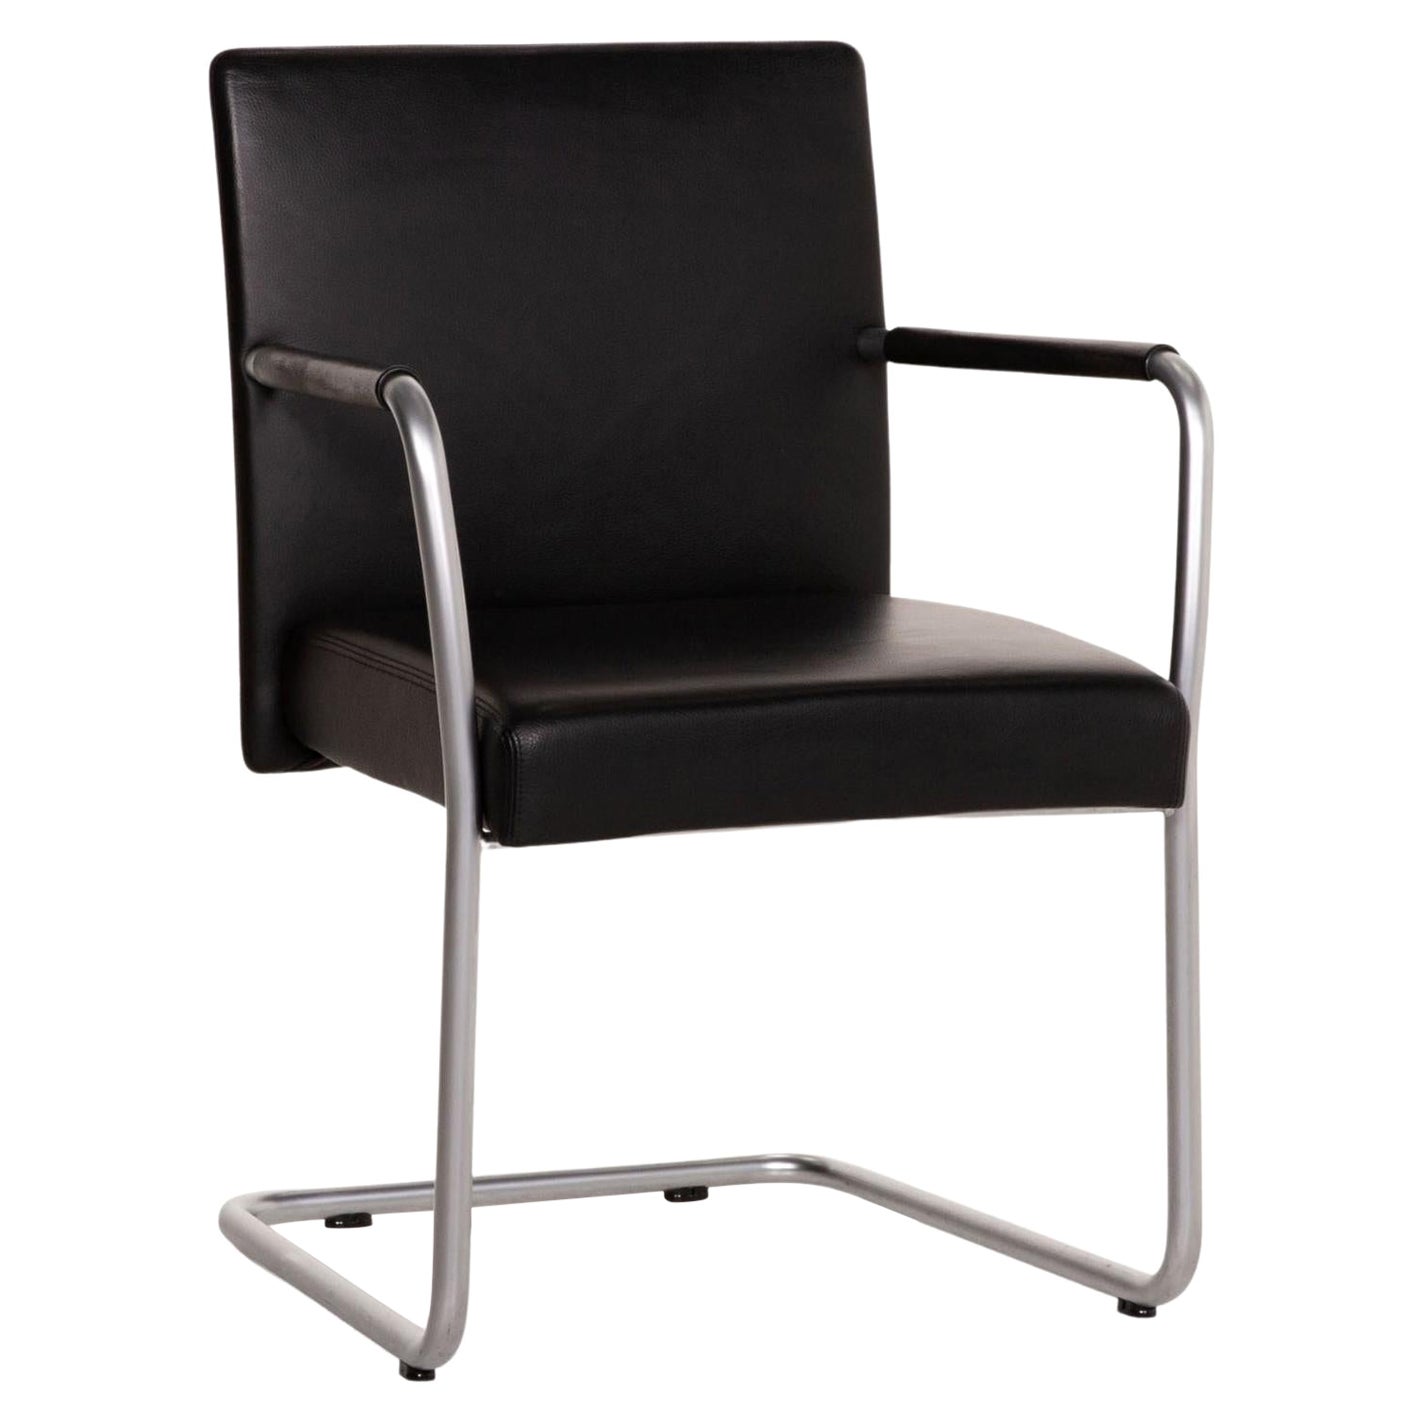 Walter Knoll Jason 1519 Leather Chair Black Cantilever For Sale